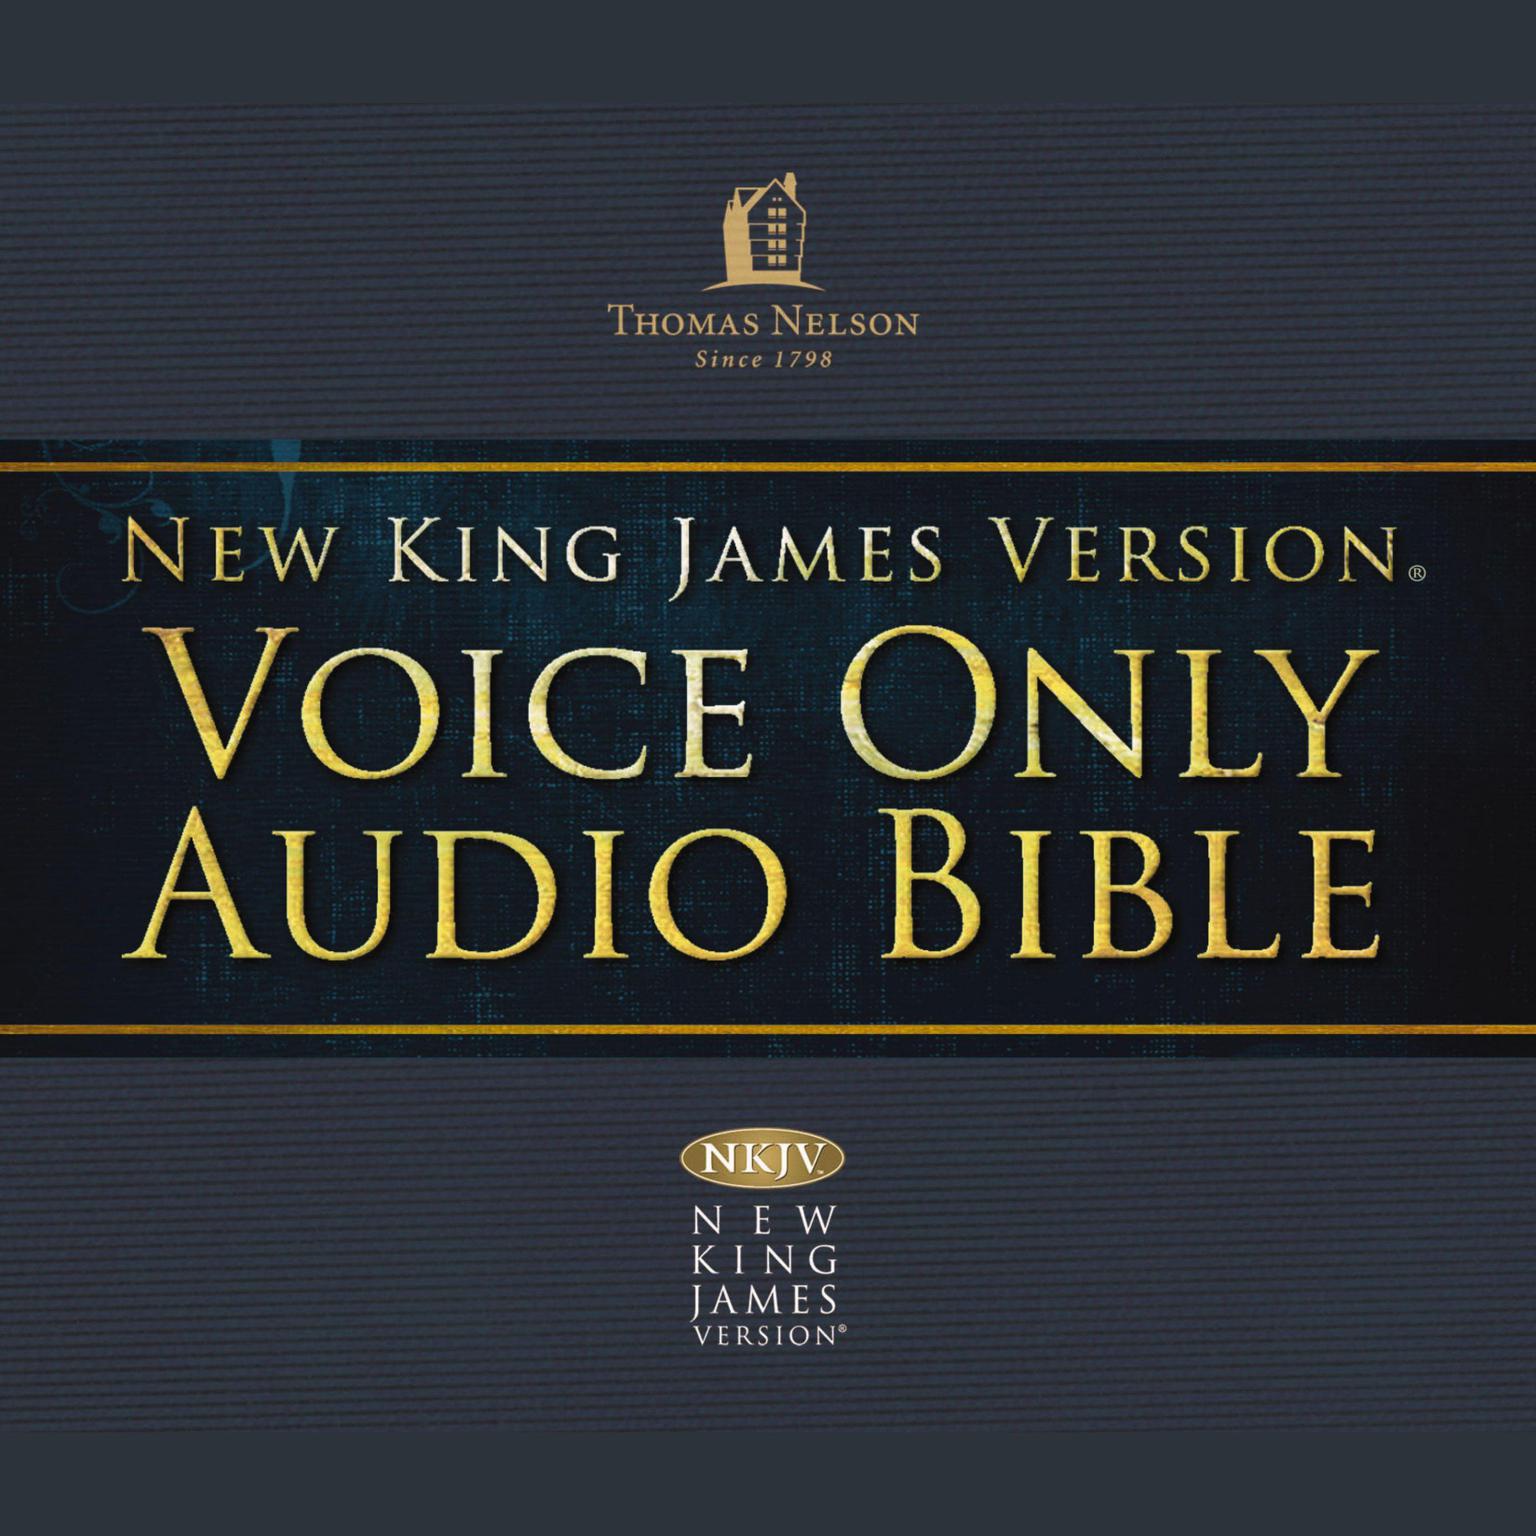 Voice Only Audio Bible - New King James Version, NKJV (Narrated by Bob Souer): (08) 1 Samuel: Holy Bible, New King James Version Audiobook, by Thomas Nelson